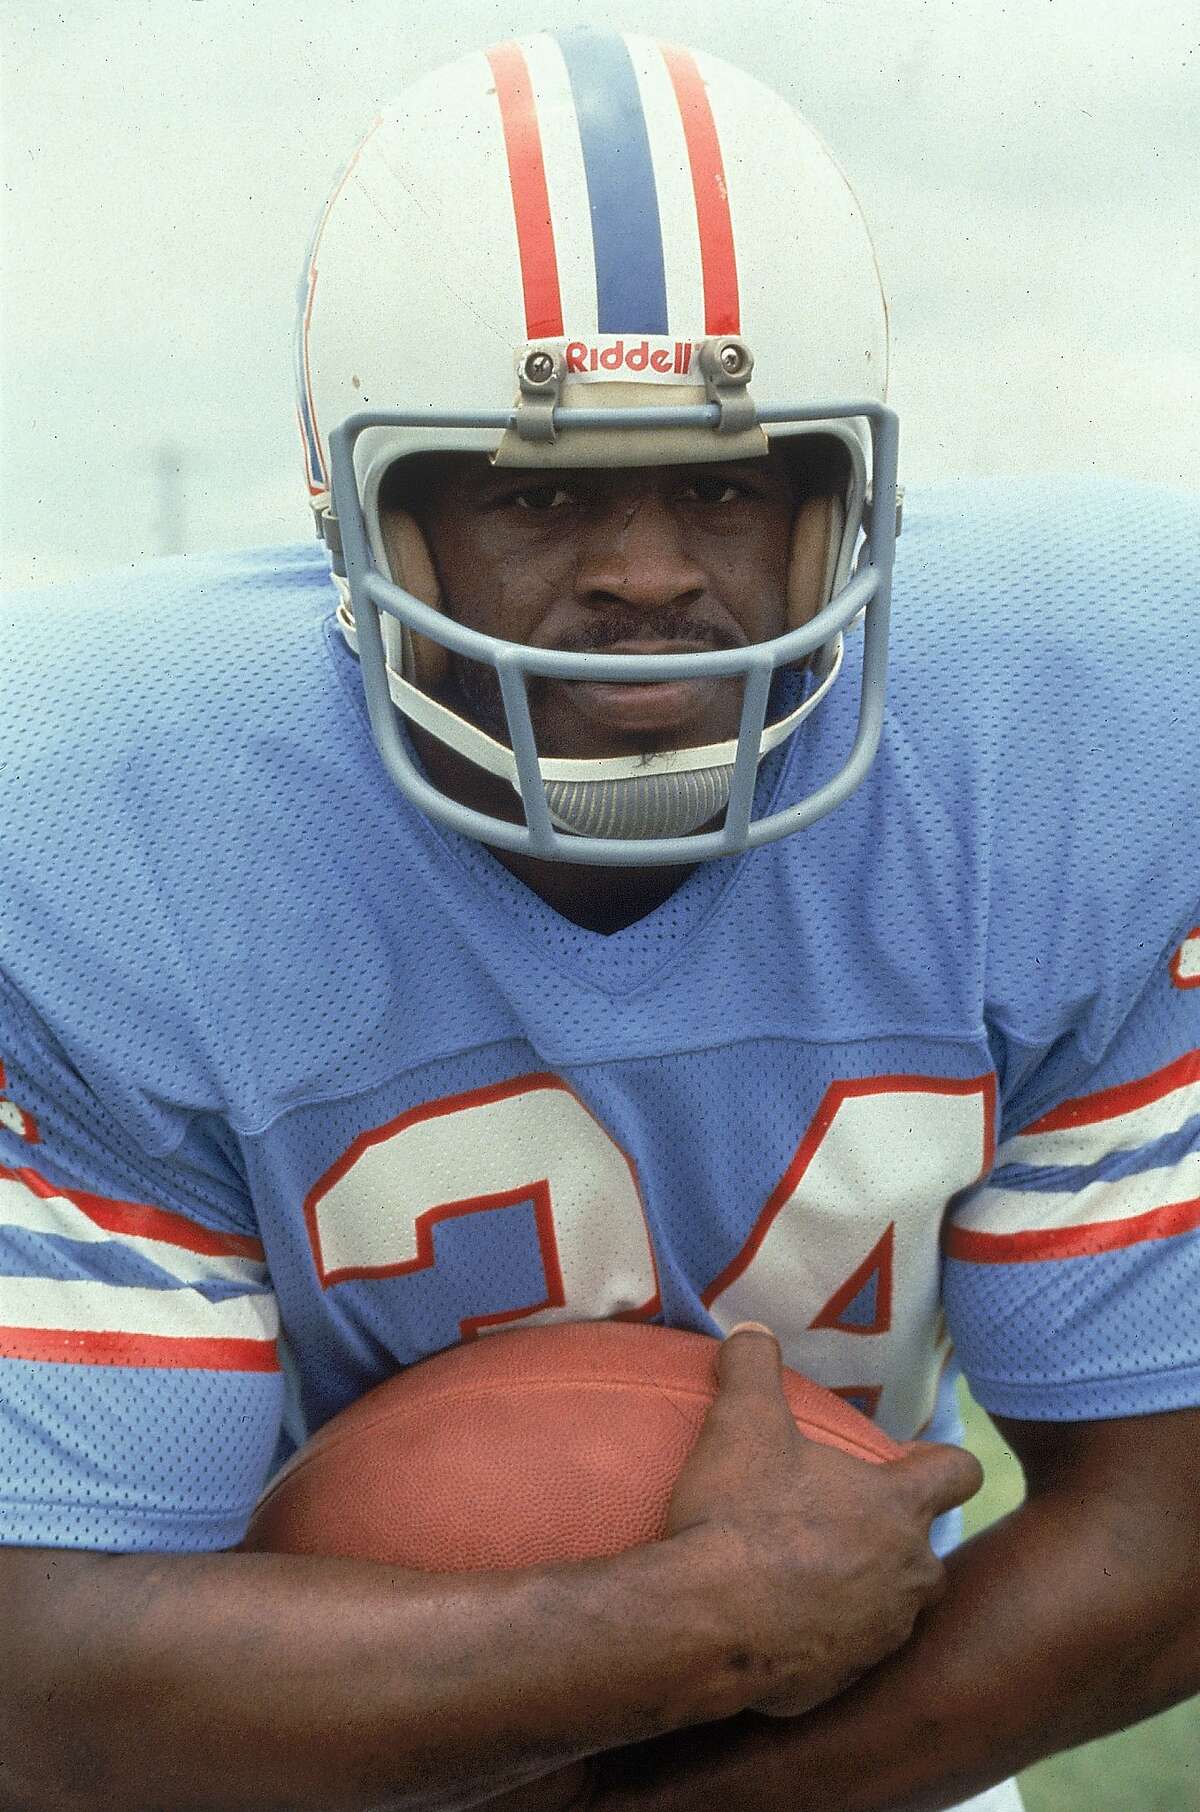 New England Patriots head coach Bill Belichick offered high praise when he was asked about the NFL naming Houston Oilers legend Earl Campbell. Last week, the NFL named the Houston Oilers legend as a finalist for the league's All-Time Team (AP Photo, file)